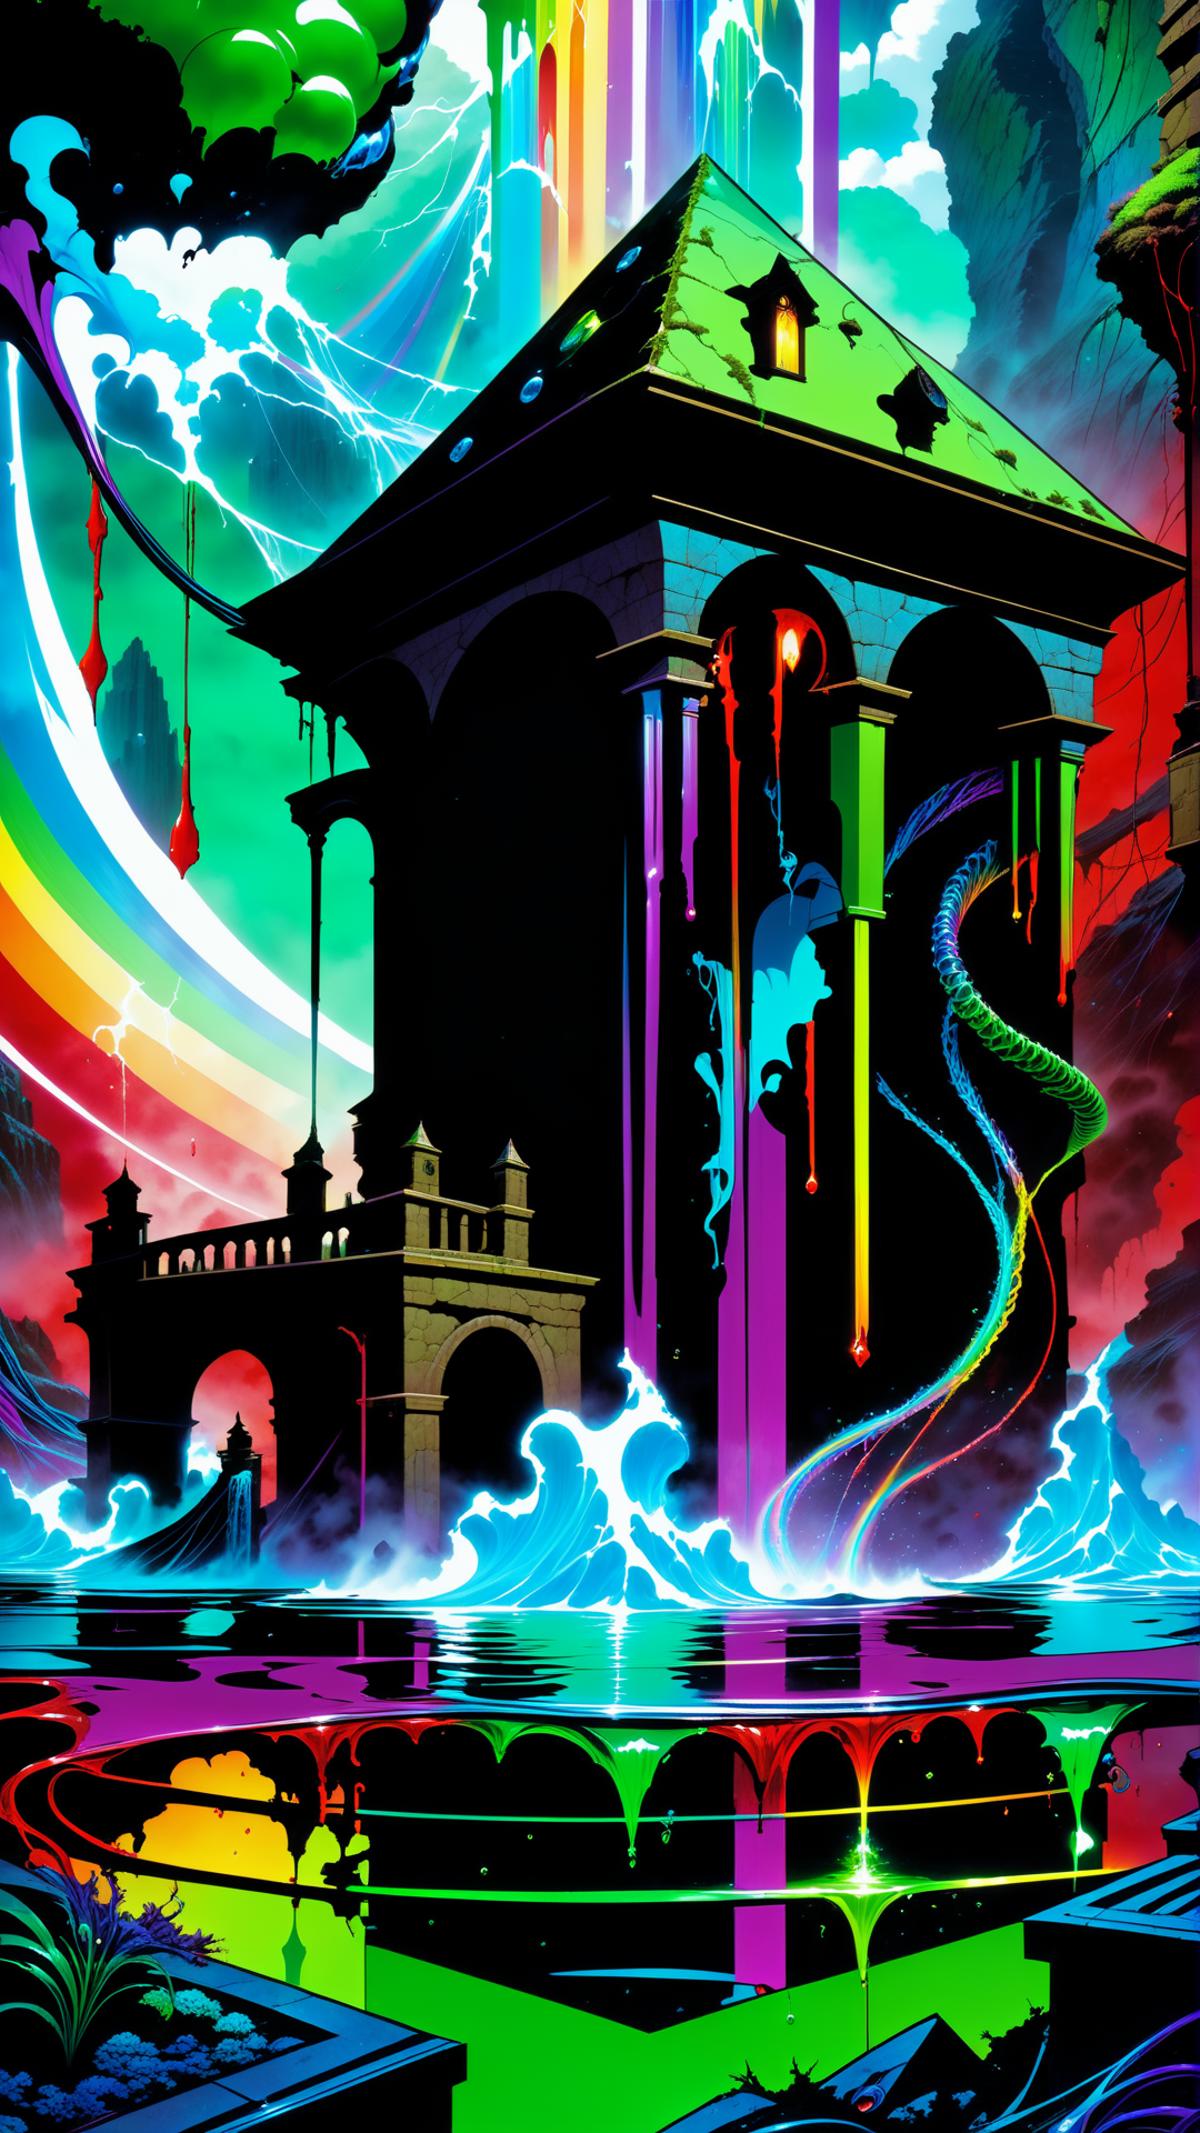 A fantasy artwork of a castle with a rainbow colored dragon and a black octopus in front of it.